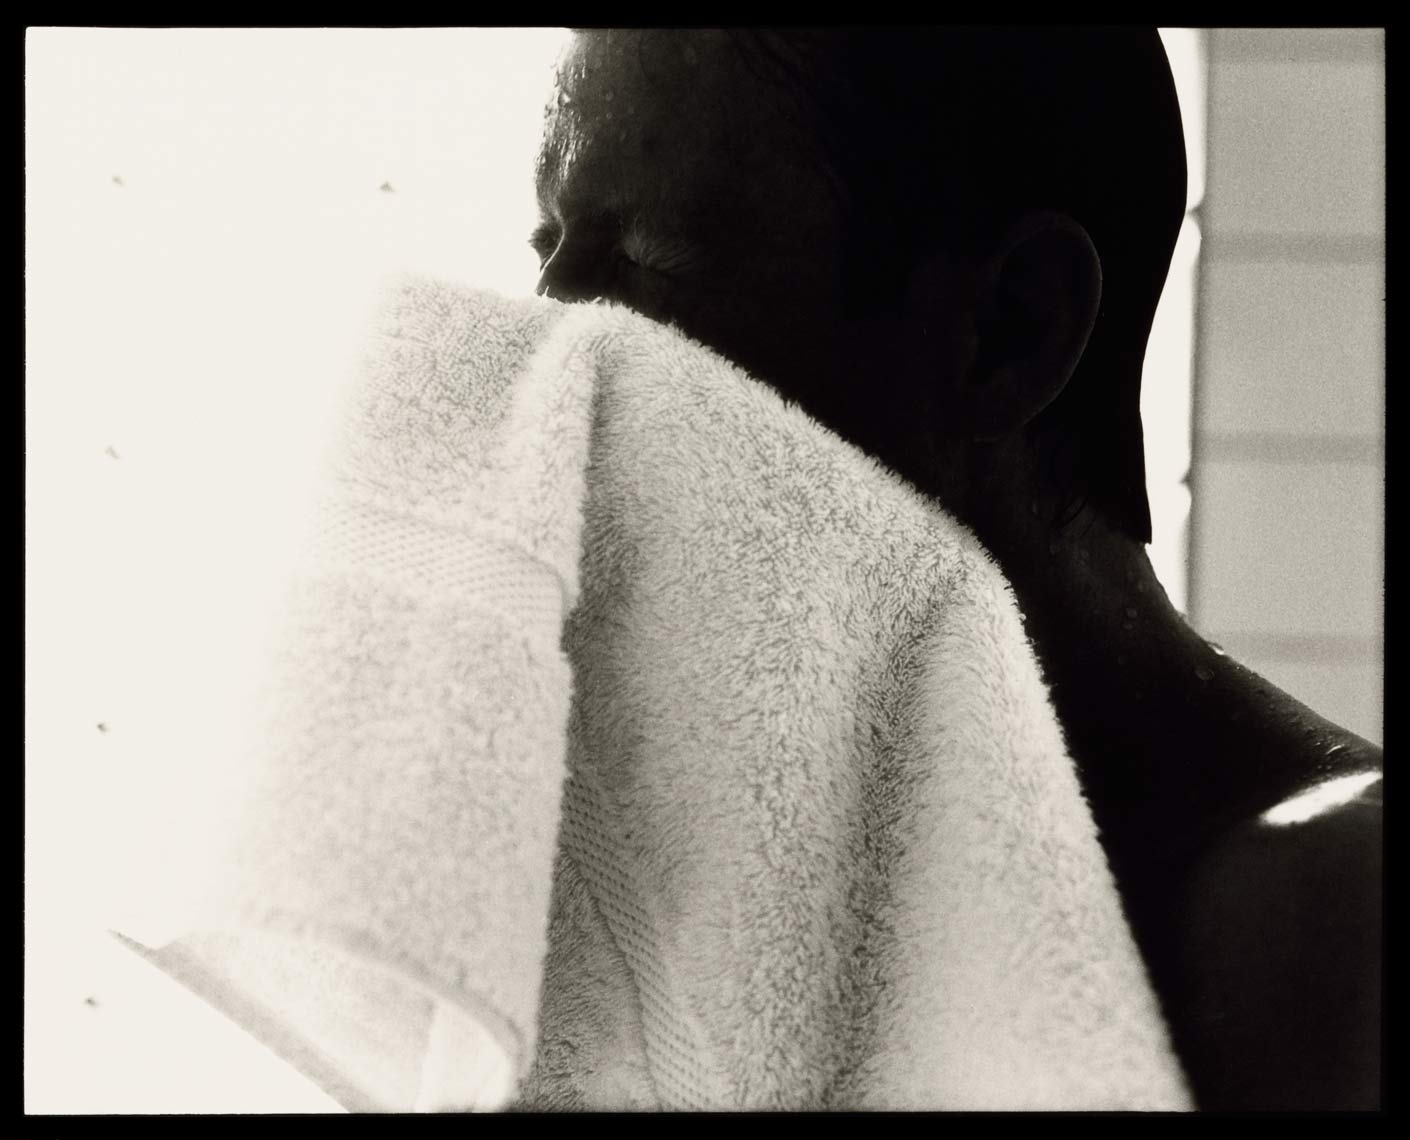 David Lebe; Morning Ritual 7, 1994, black and white photograph about living with AIDS